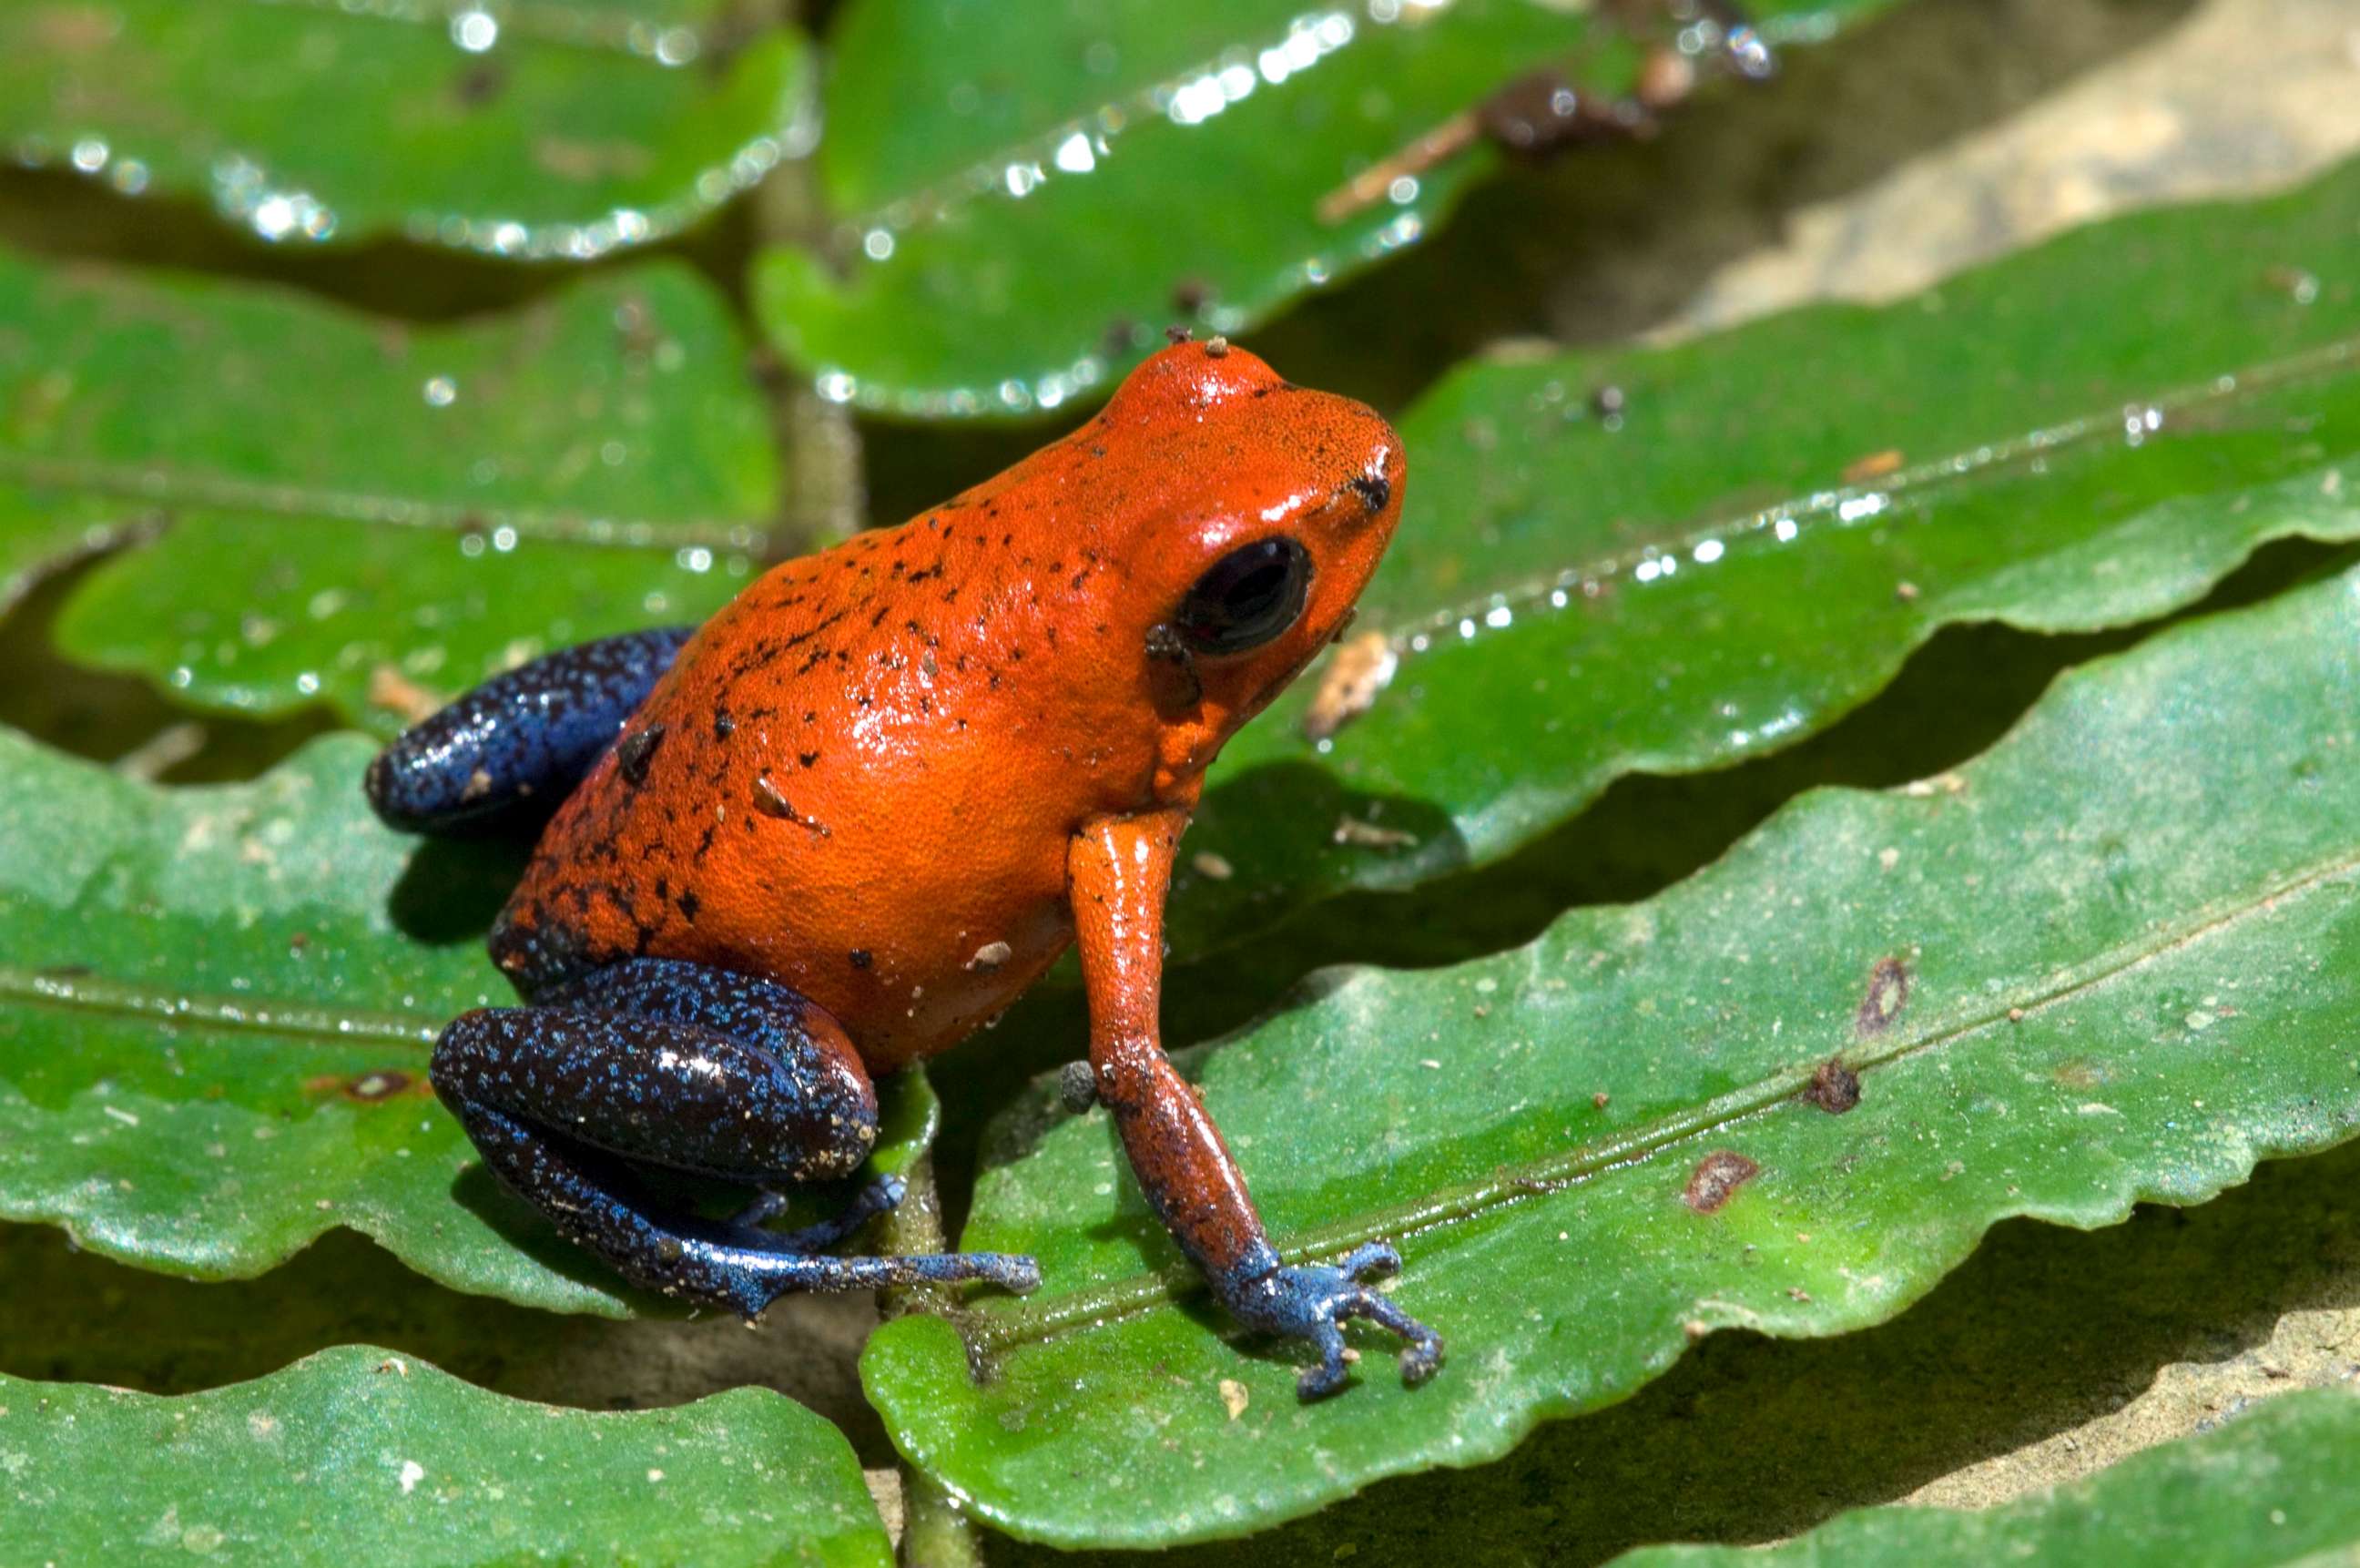 https://s.abcnews.com/images/Technology/strawberry-poison-frog-file-gty-jef-190802_hpMain.jpg